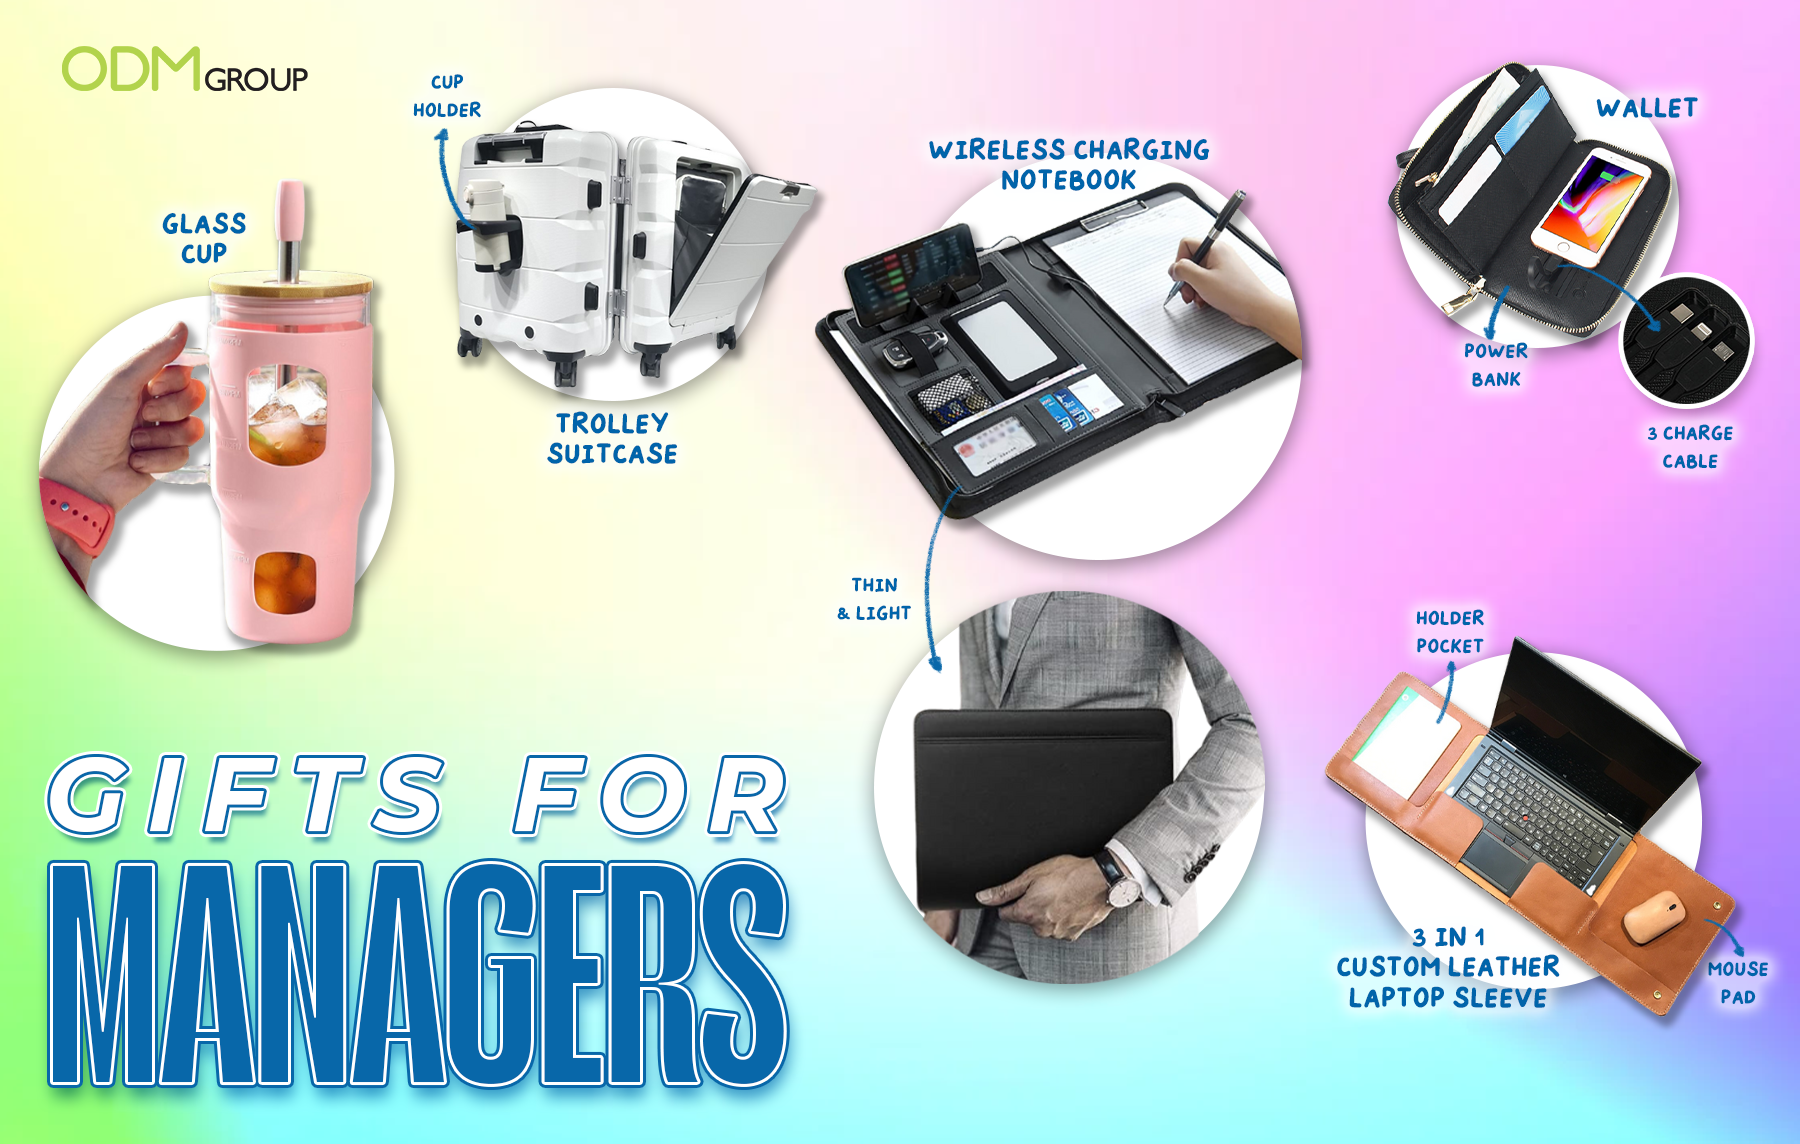 Corporate Gift Ideas - Gifts for Managers